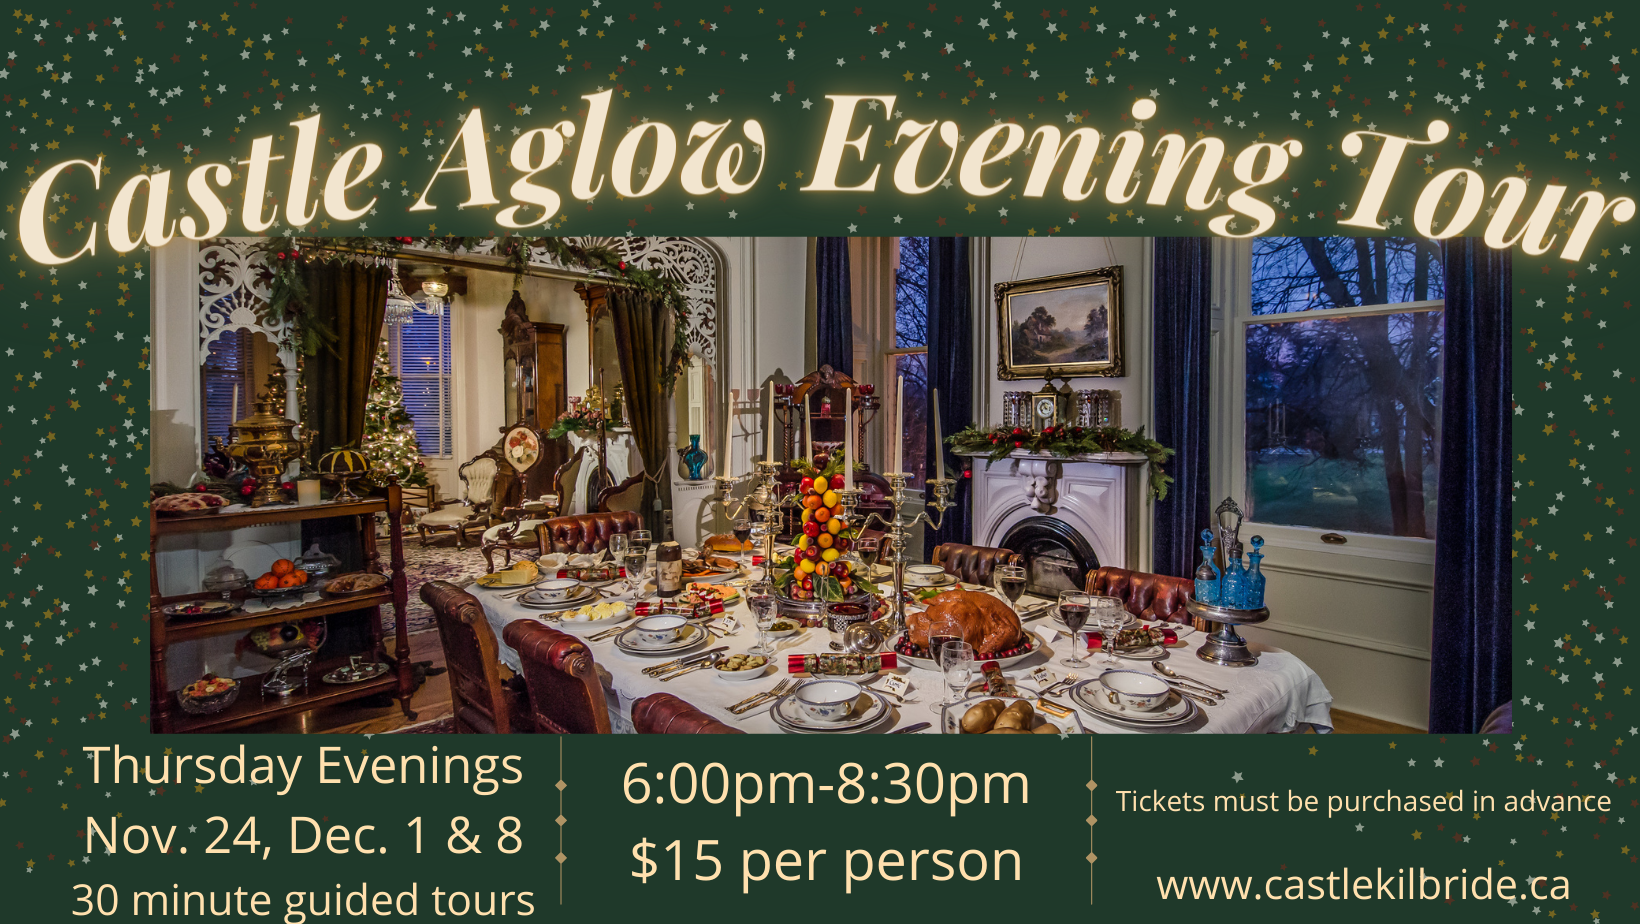 Dark green background with evening view of Victorian table set for Christmas